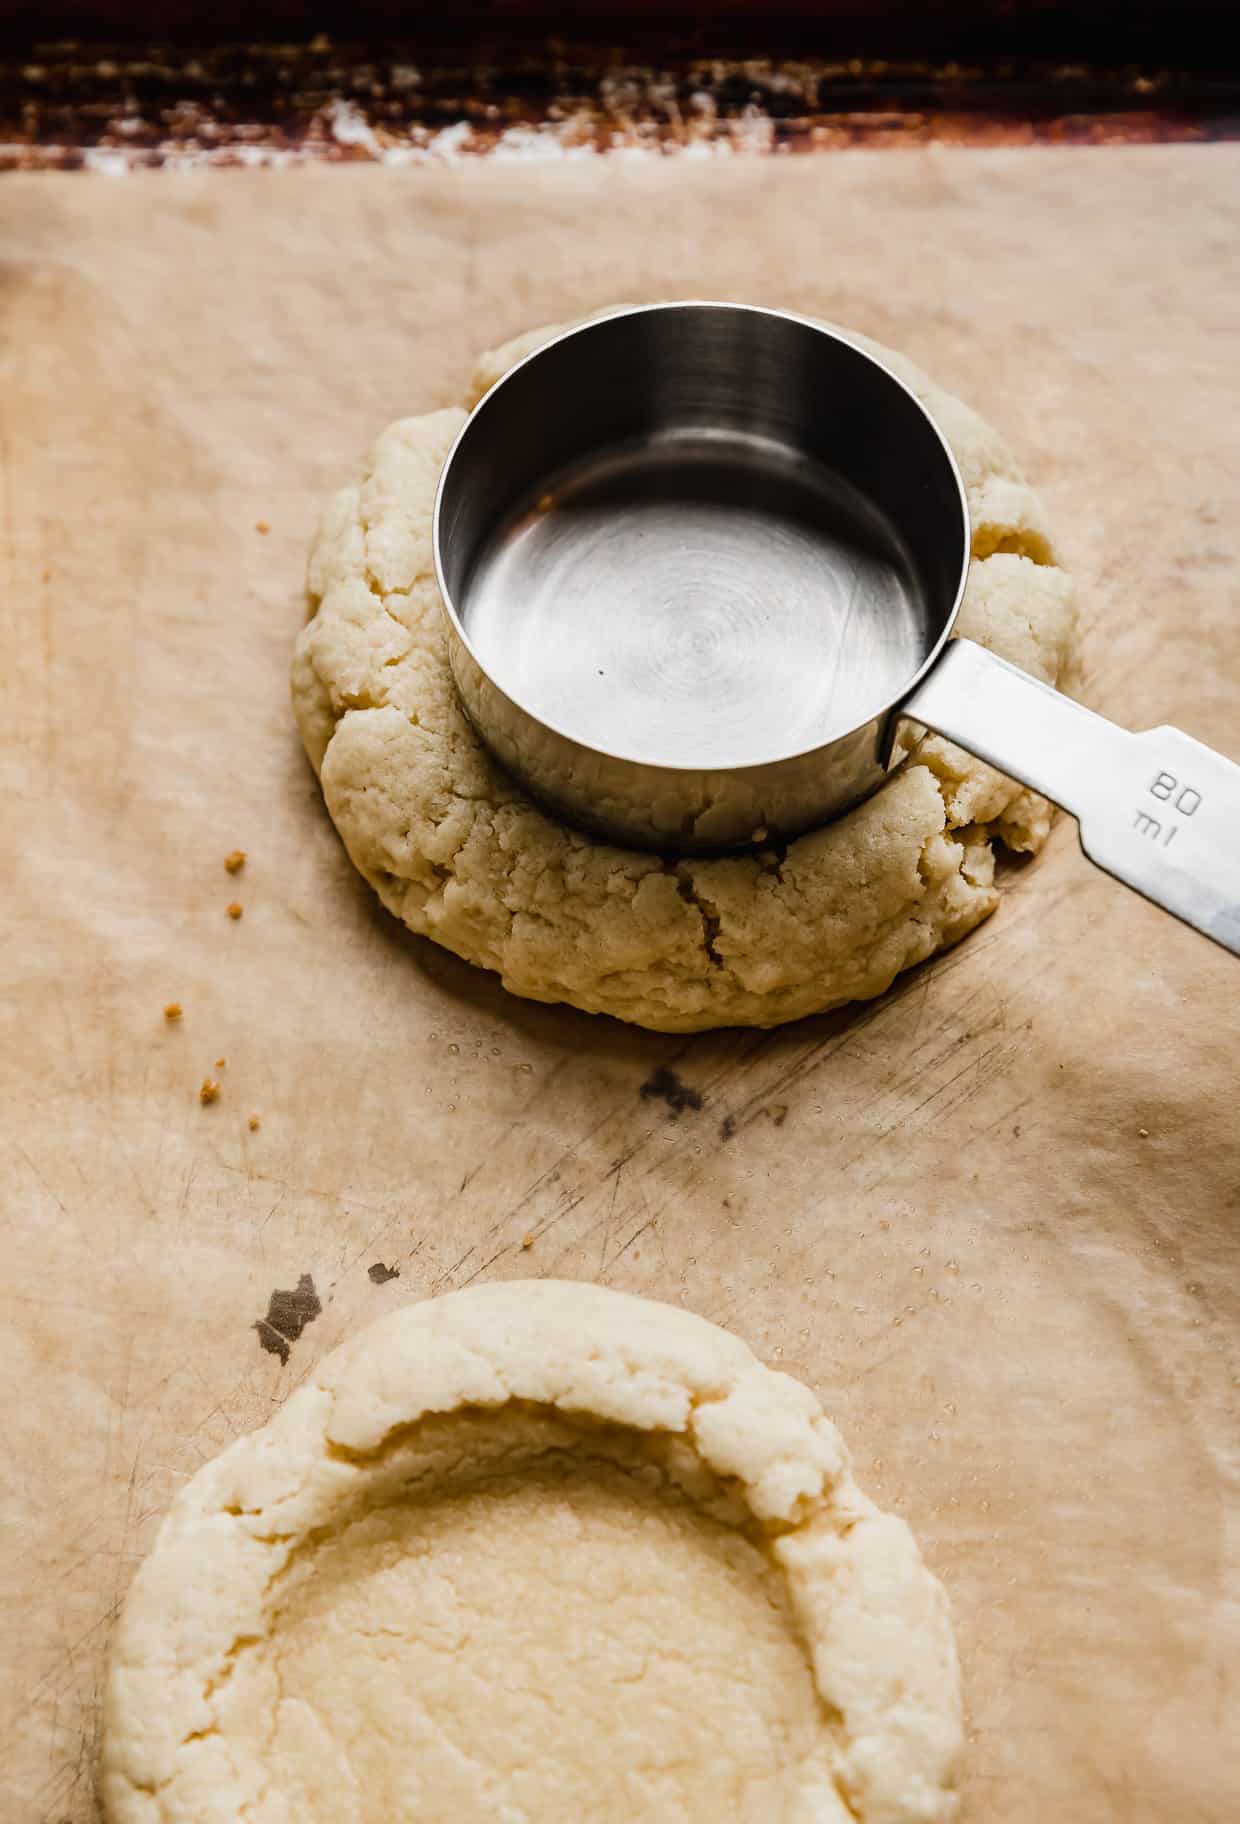 A third cup measuring cup pressing into a partially baked sugar cookie on a baking sheet.